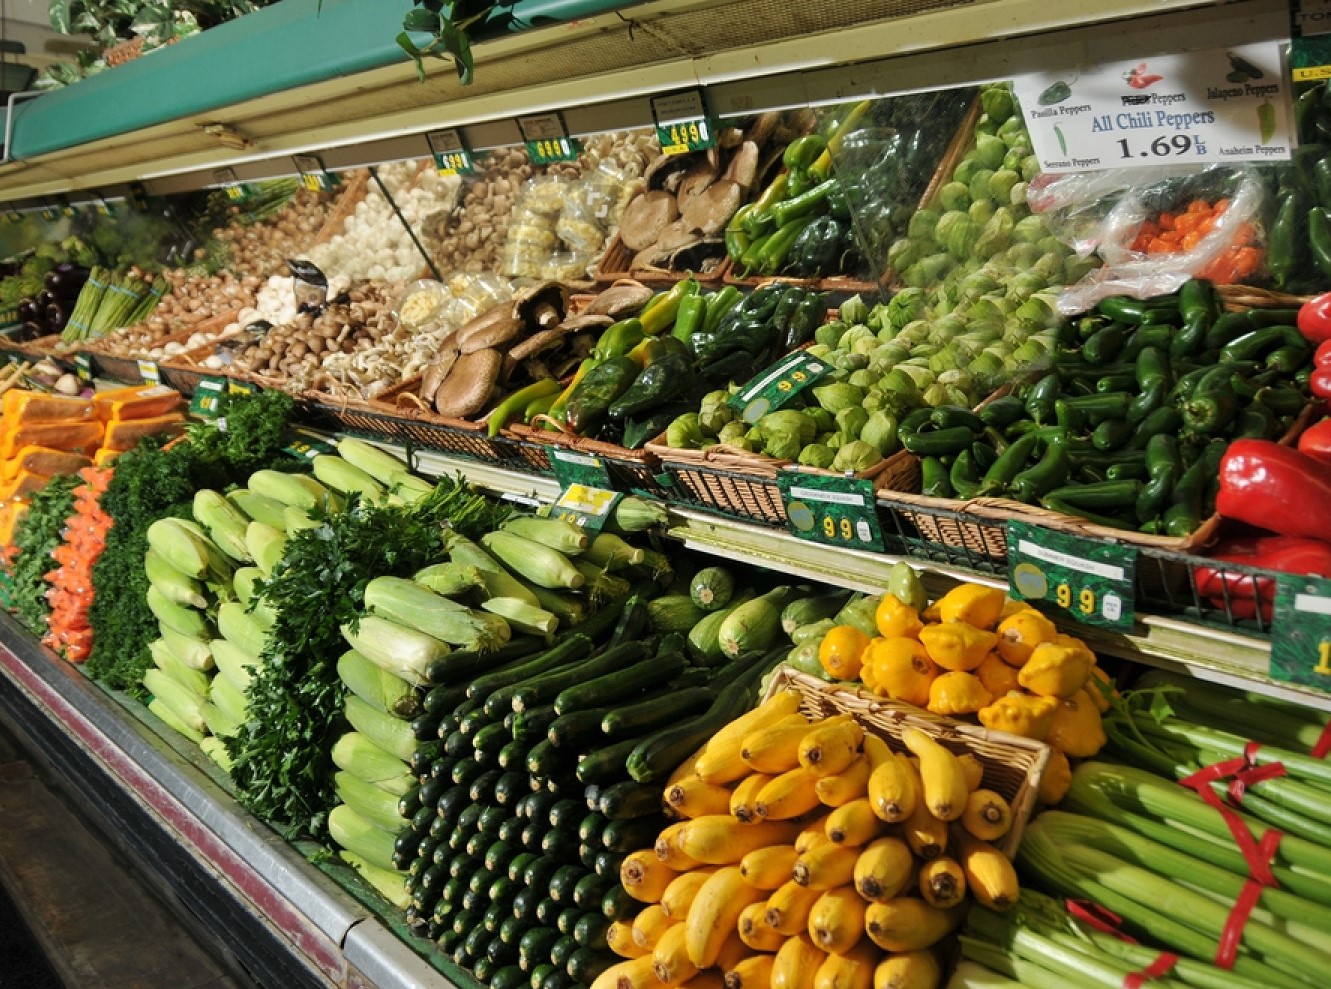 How to Find a Produce Wholesaler in Chicago?